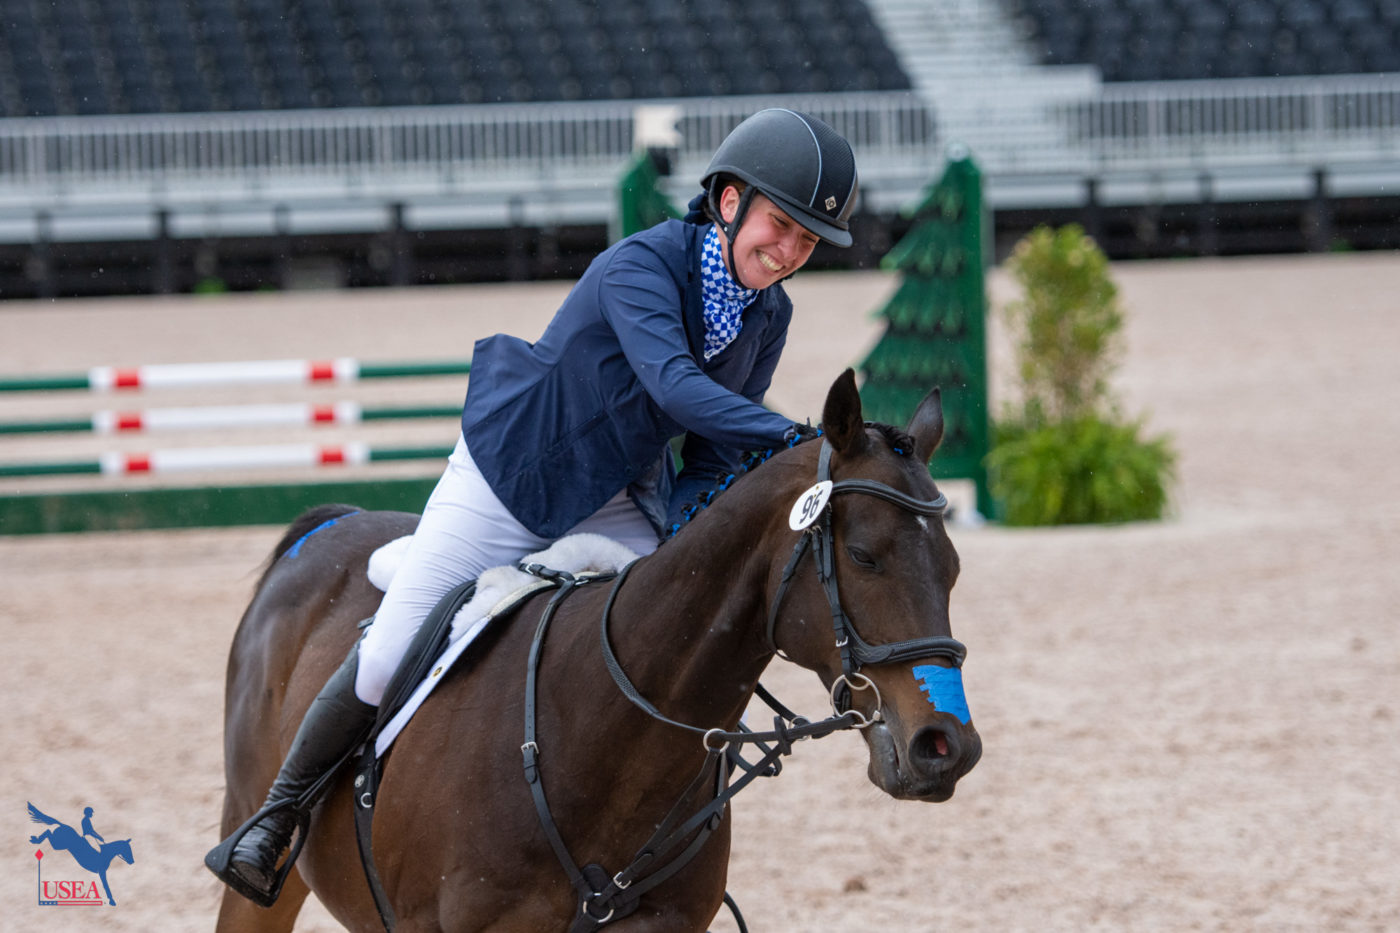 Ali Otipoby and Mighty Mouse. USEA/Shelby Allen photo